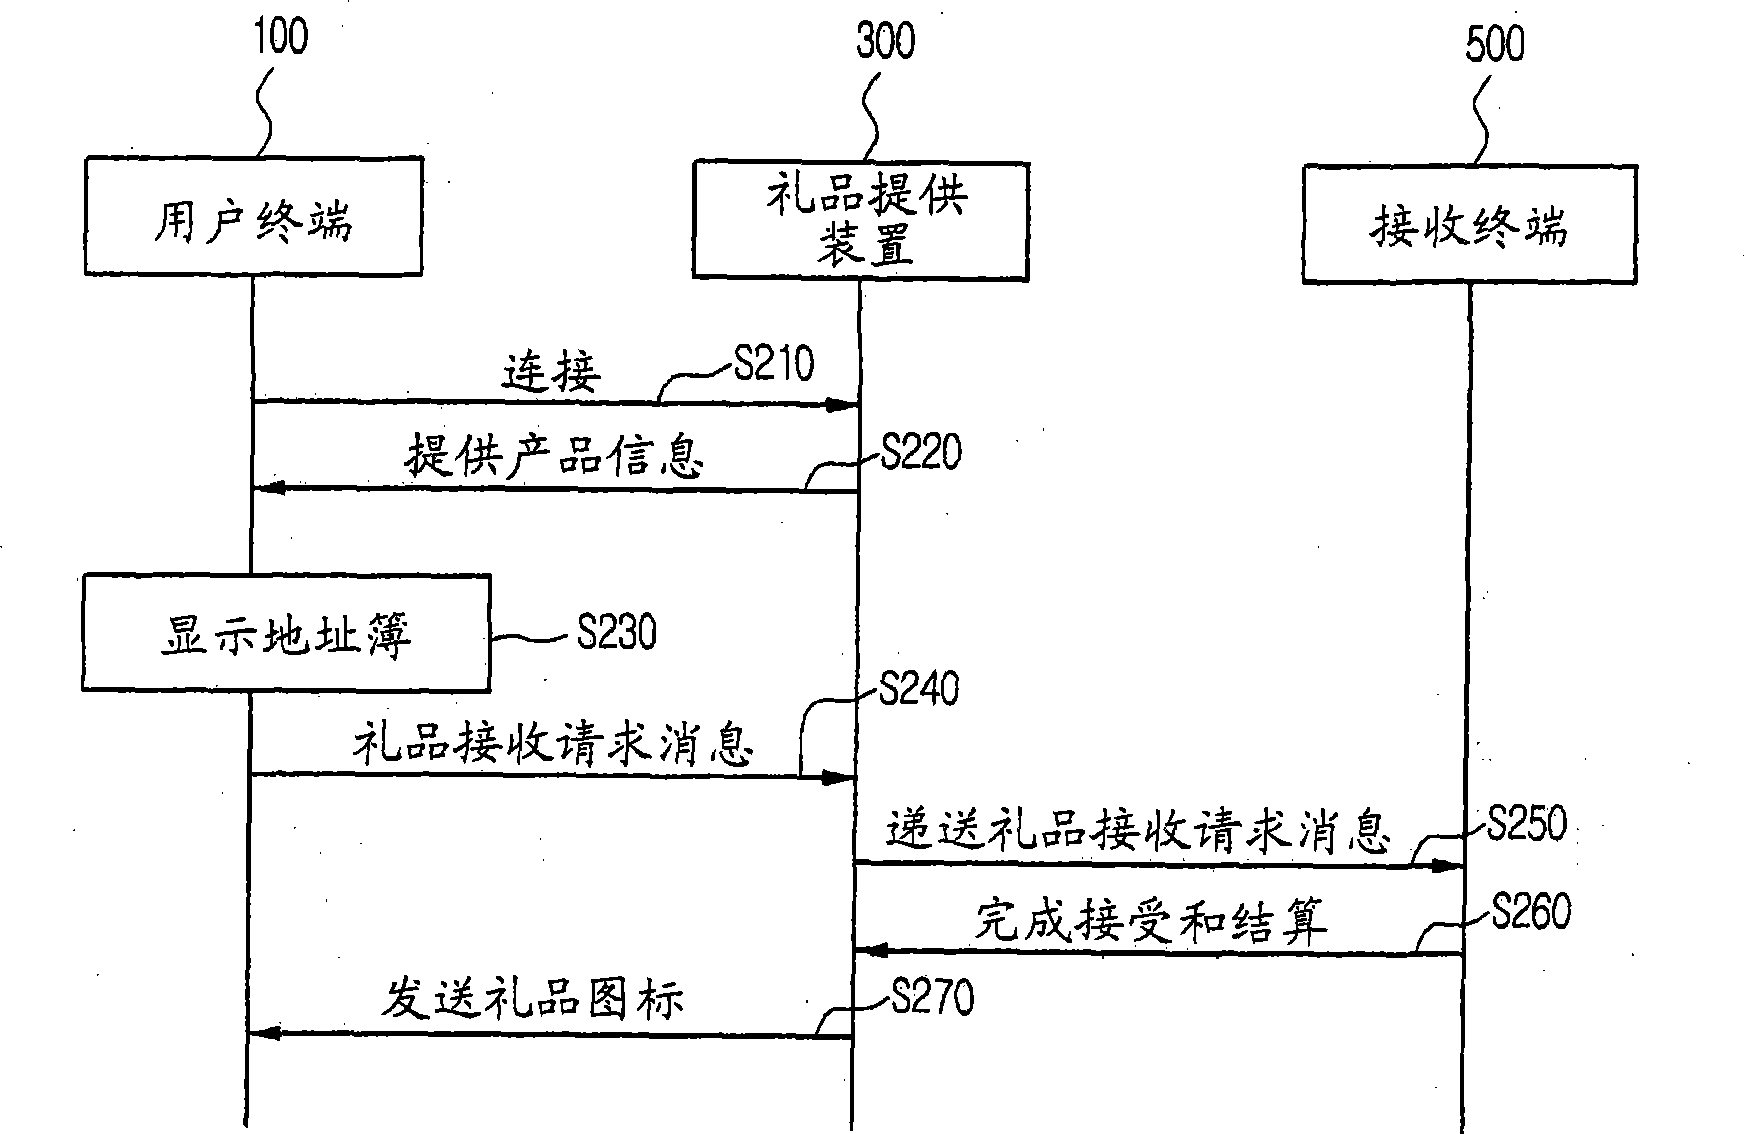 Method and apparatus for providing gift by using communication network and system including the apparatus